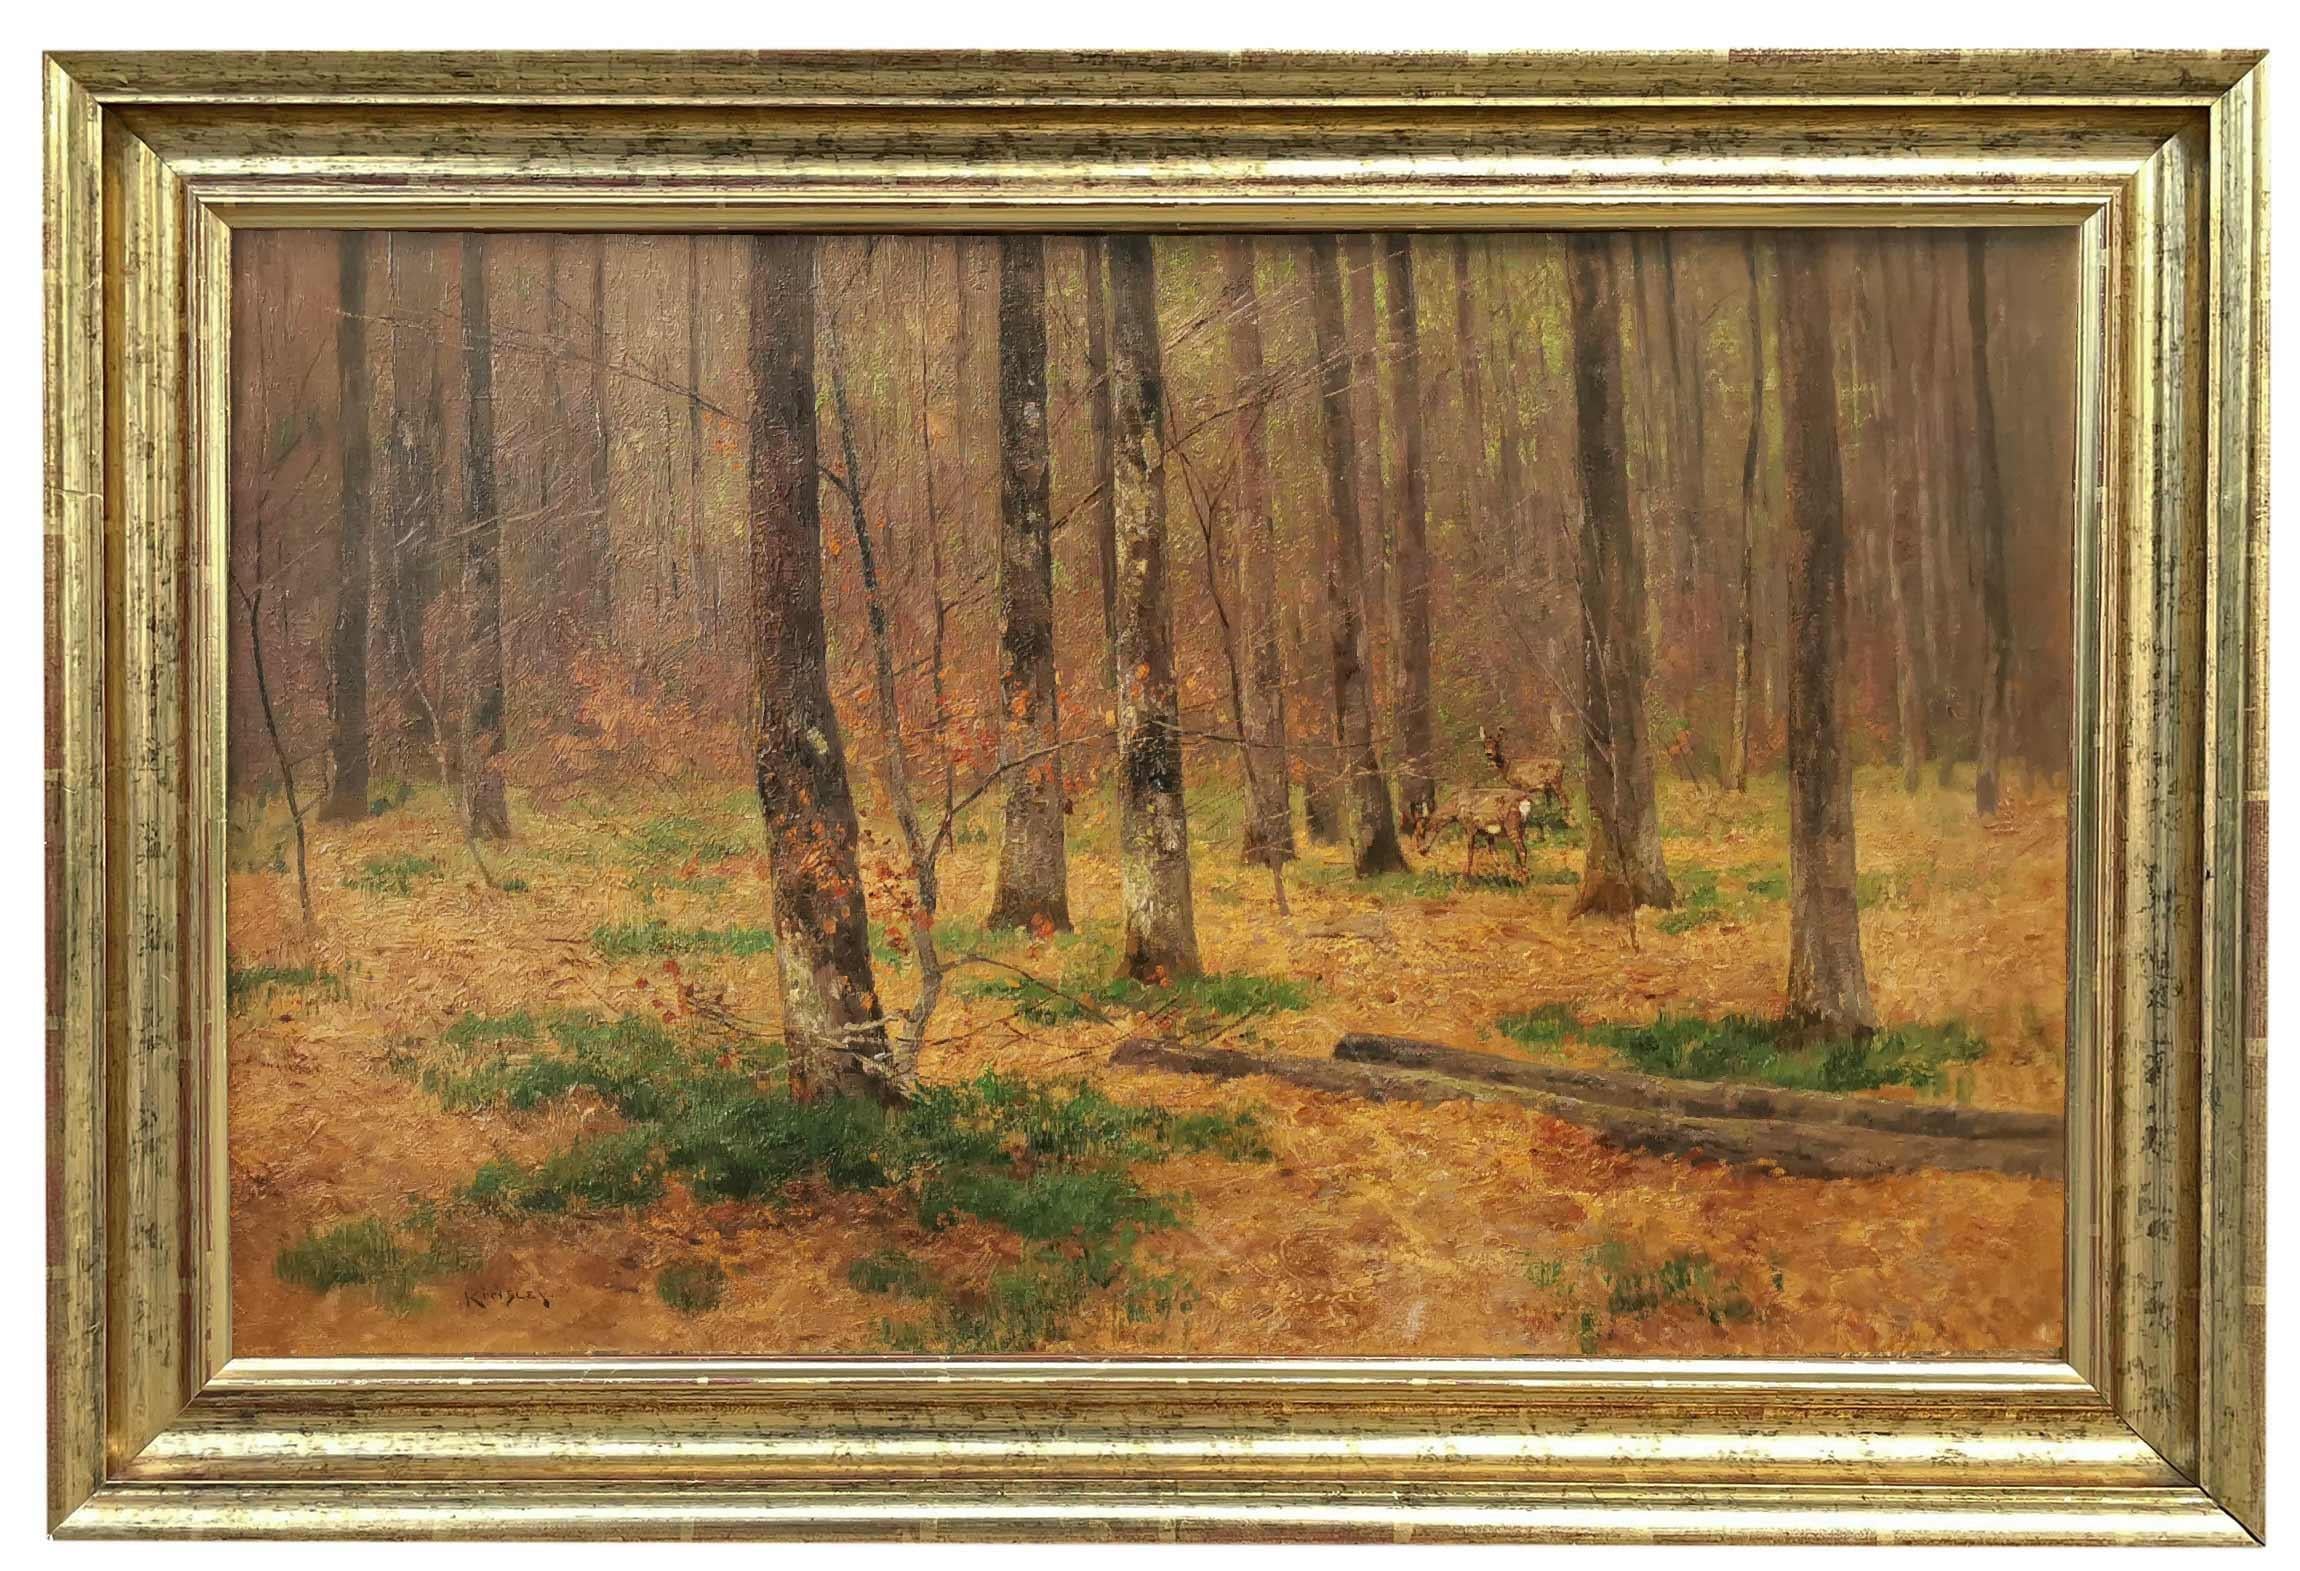 Roe Deer in the Woods – Nelson Gray Kinsley (1863 – 1945)

Work measurements: 36 x 59 cm
Measurements with frame: 45 x 68 cm
Technique: oil on canvas
Period: 1910s

In the woods, spring is upon us: the snow has completely melted and the first tufts